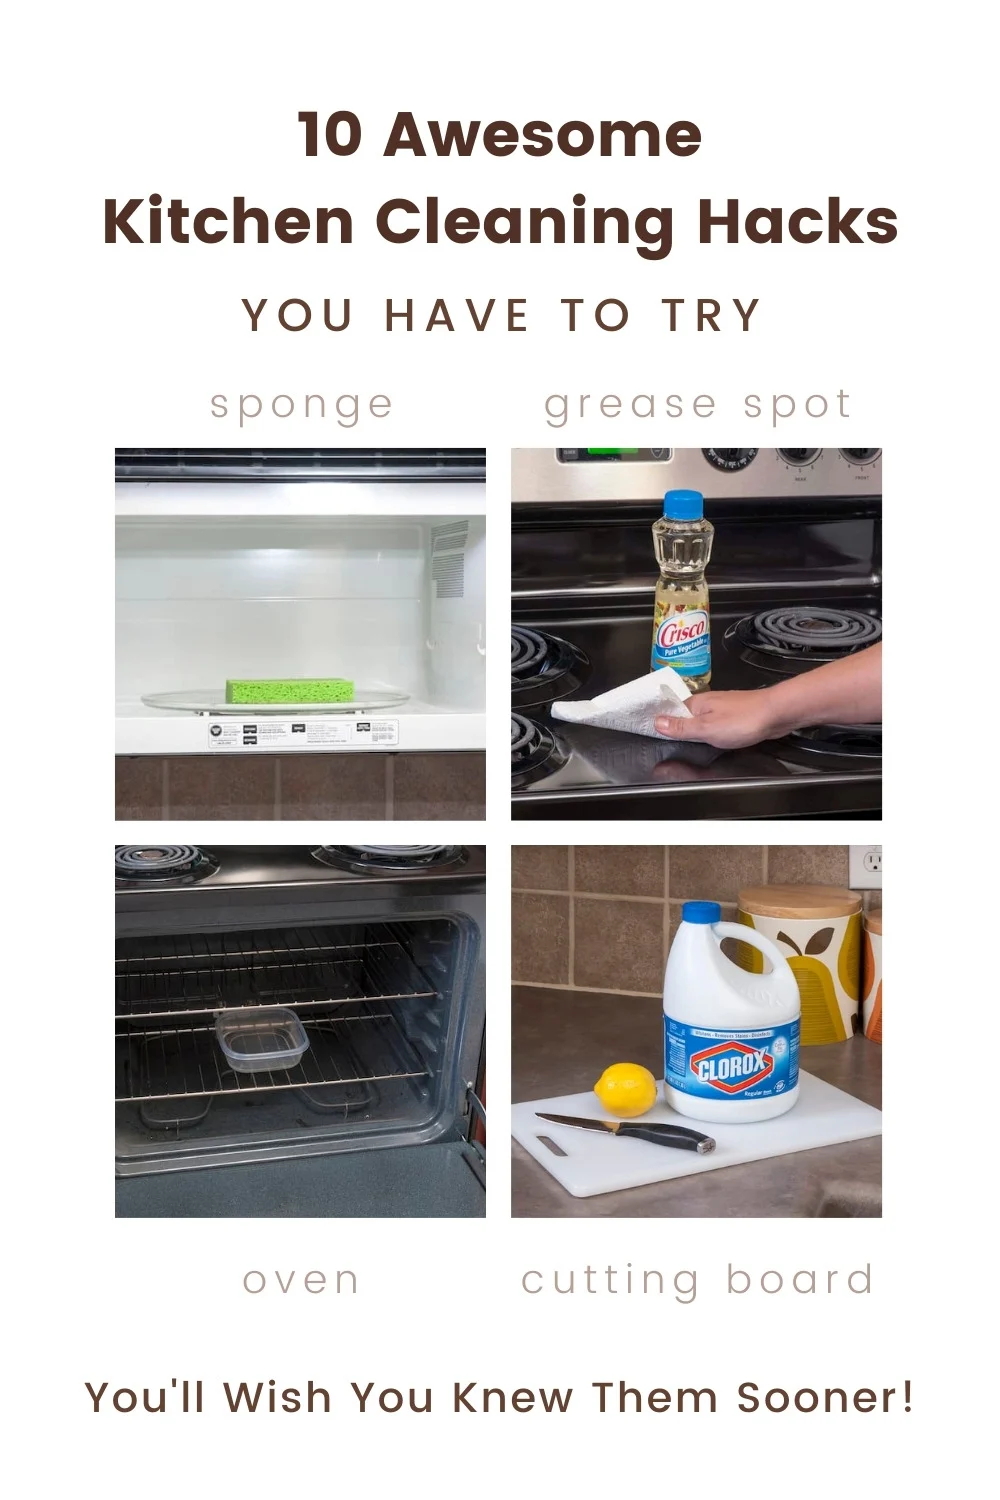 Thrift-Minded Quality cleaning hacks for the kitchen, cleaning hacks 